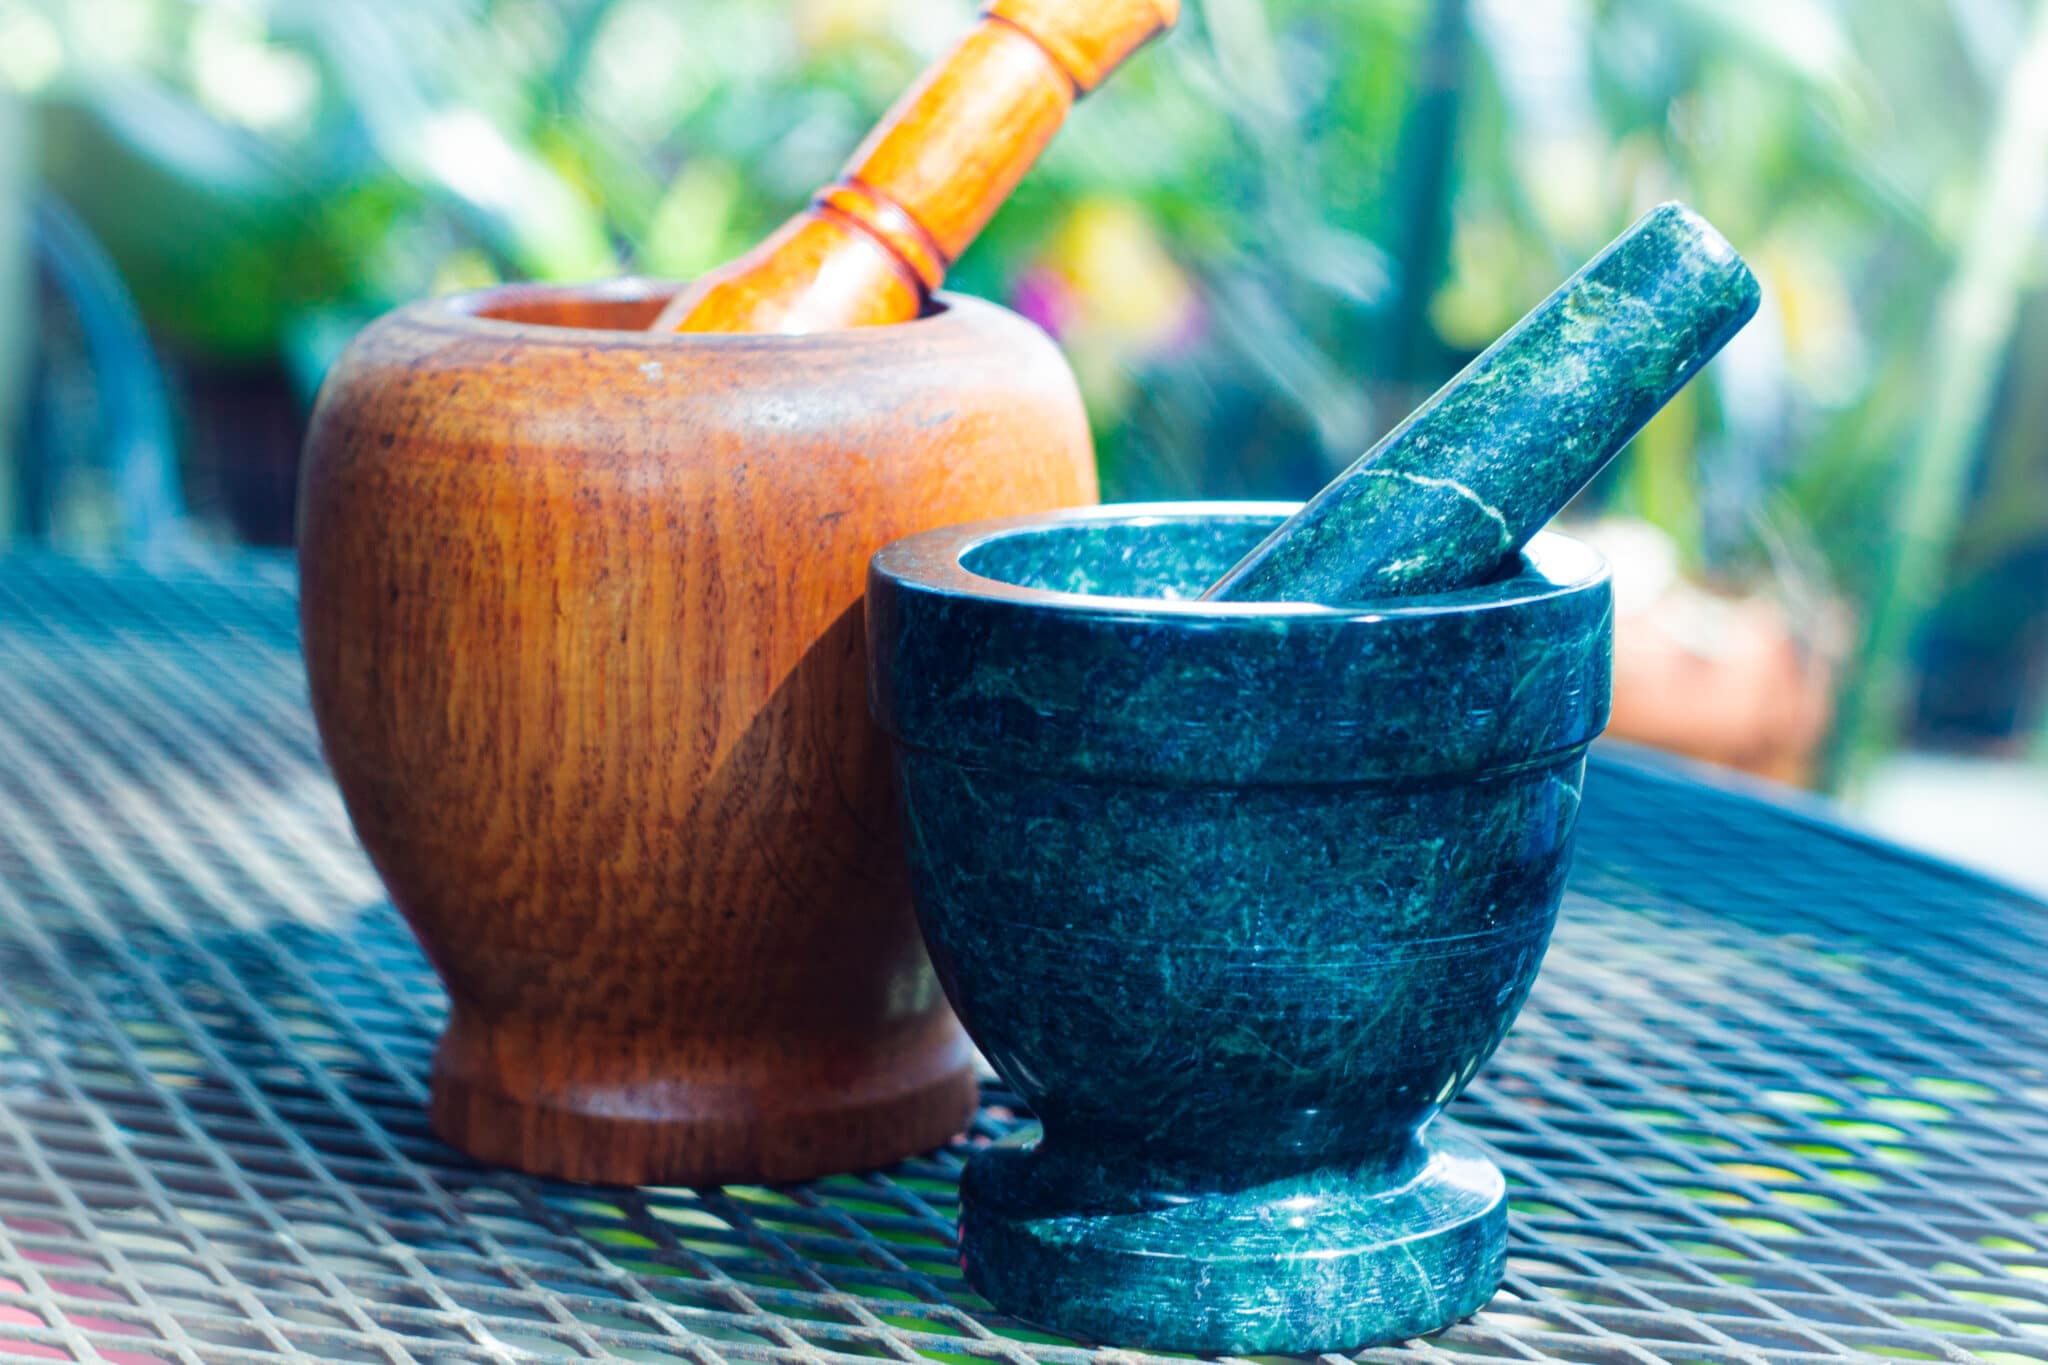 two pestles and mortars on a table